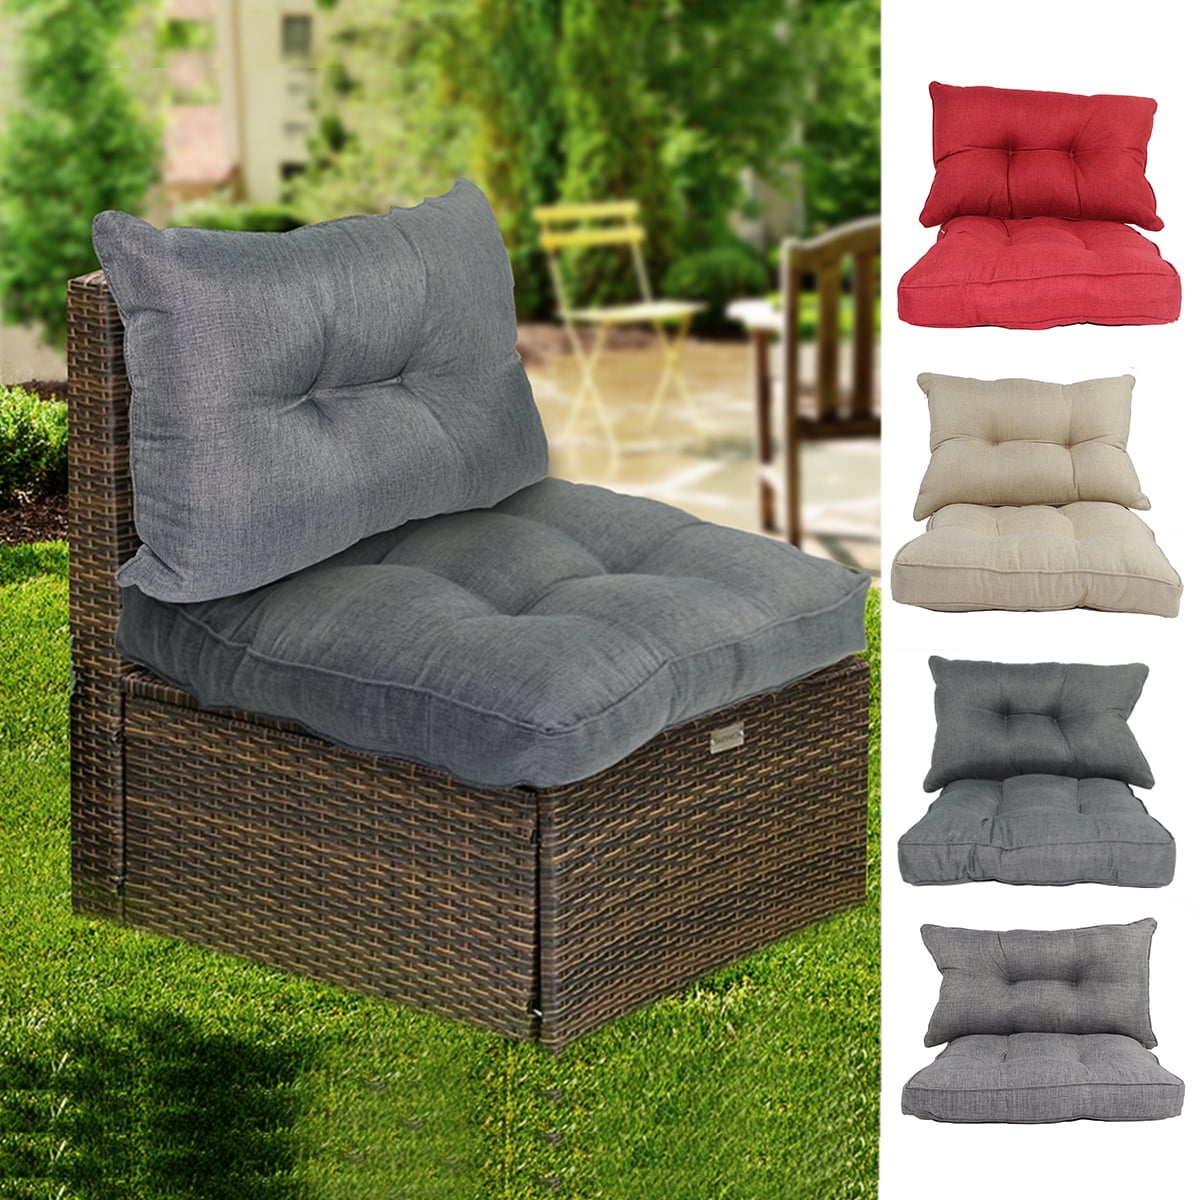 Outdoor Patio Deep Seat Chair Cushion, Outdoor Wicker Chair Seat Back Cushions